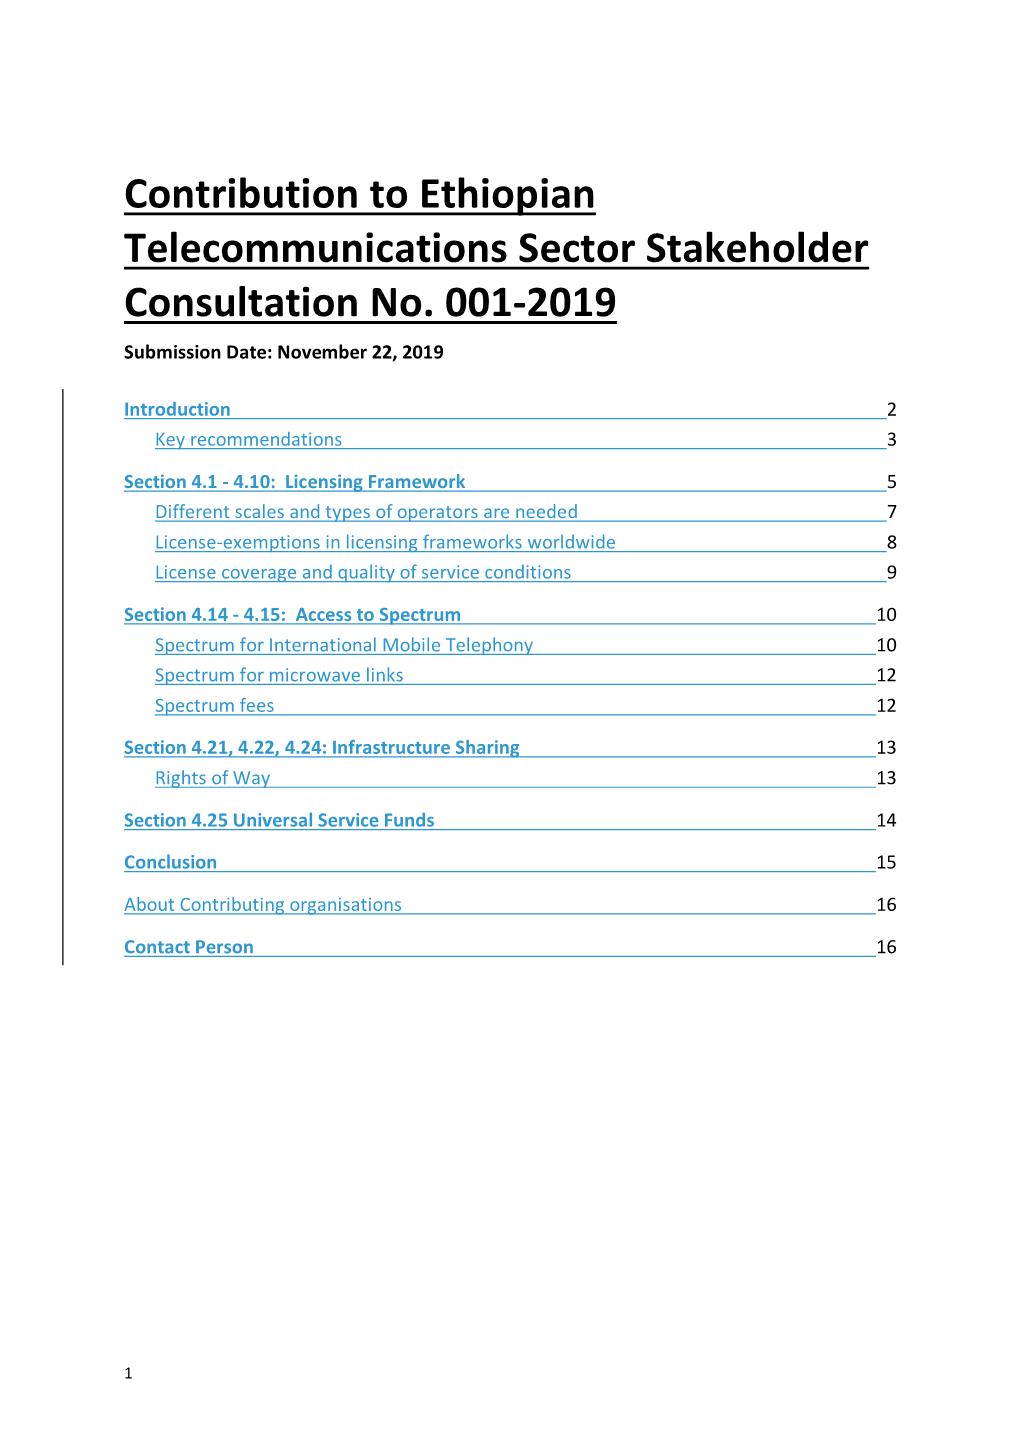 Civil Society Contribution to Ethiopian Telecommunications Sector